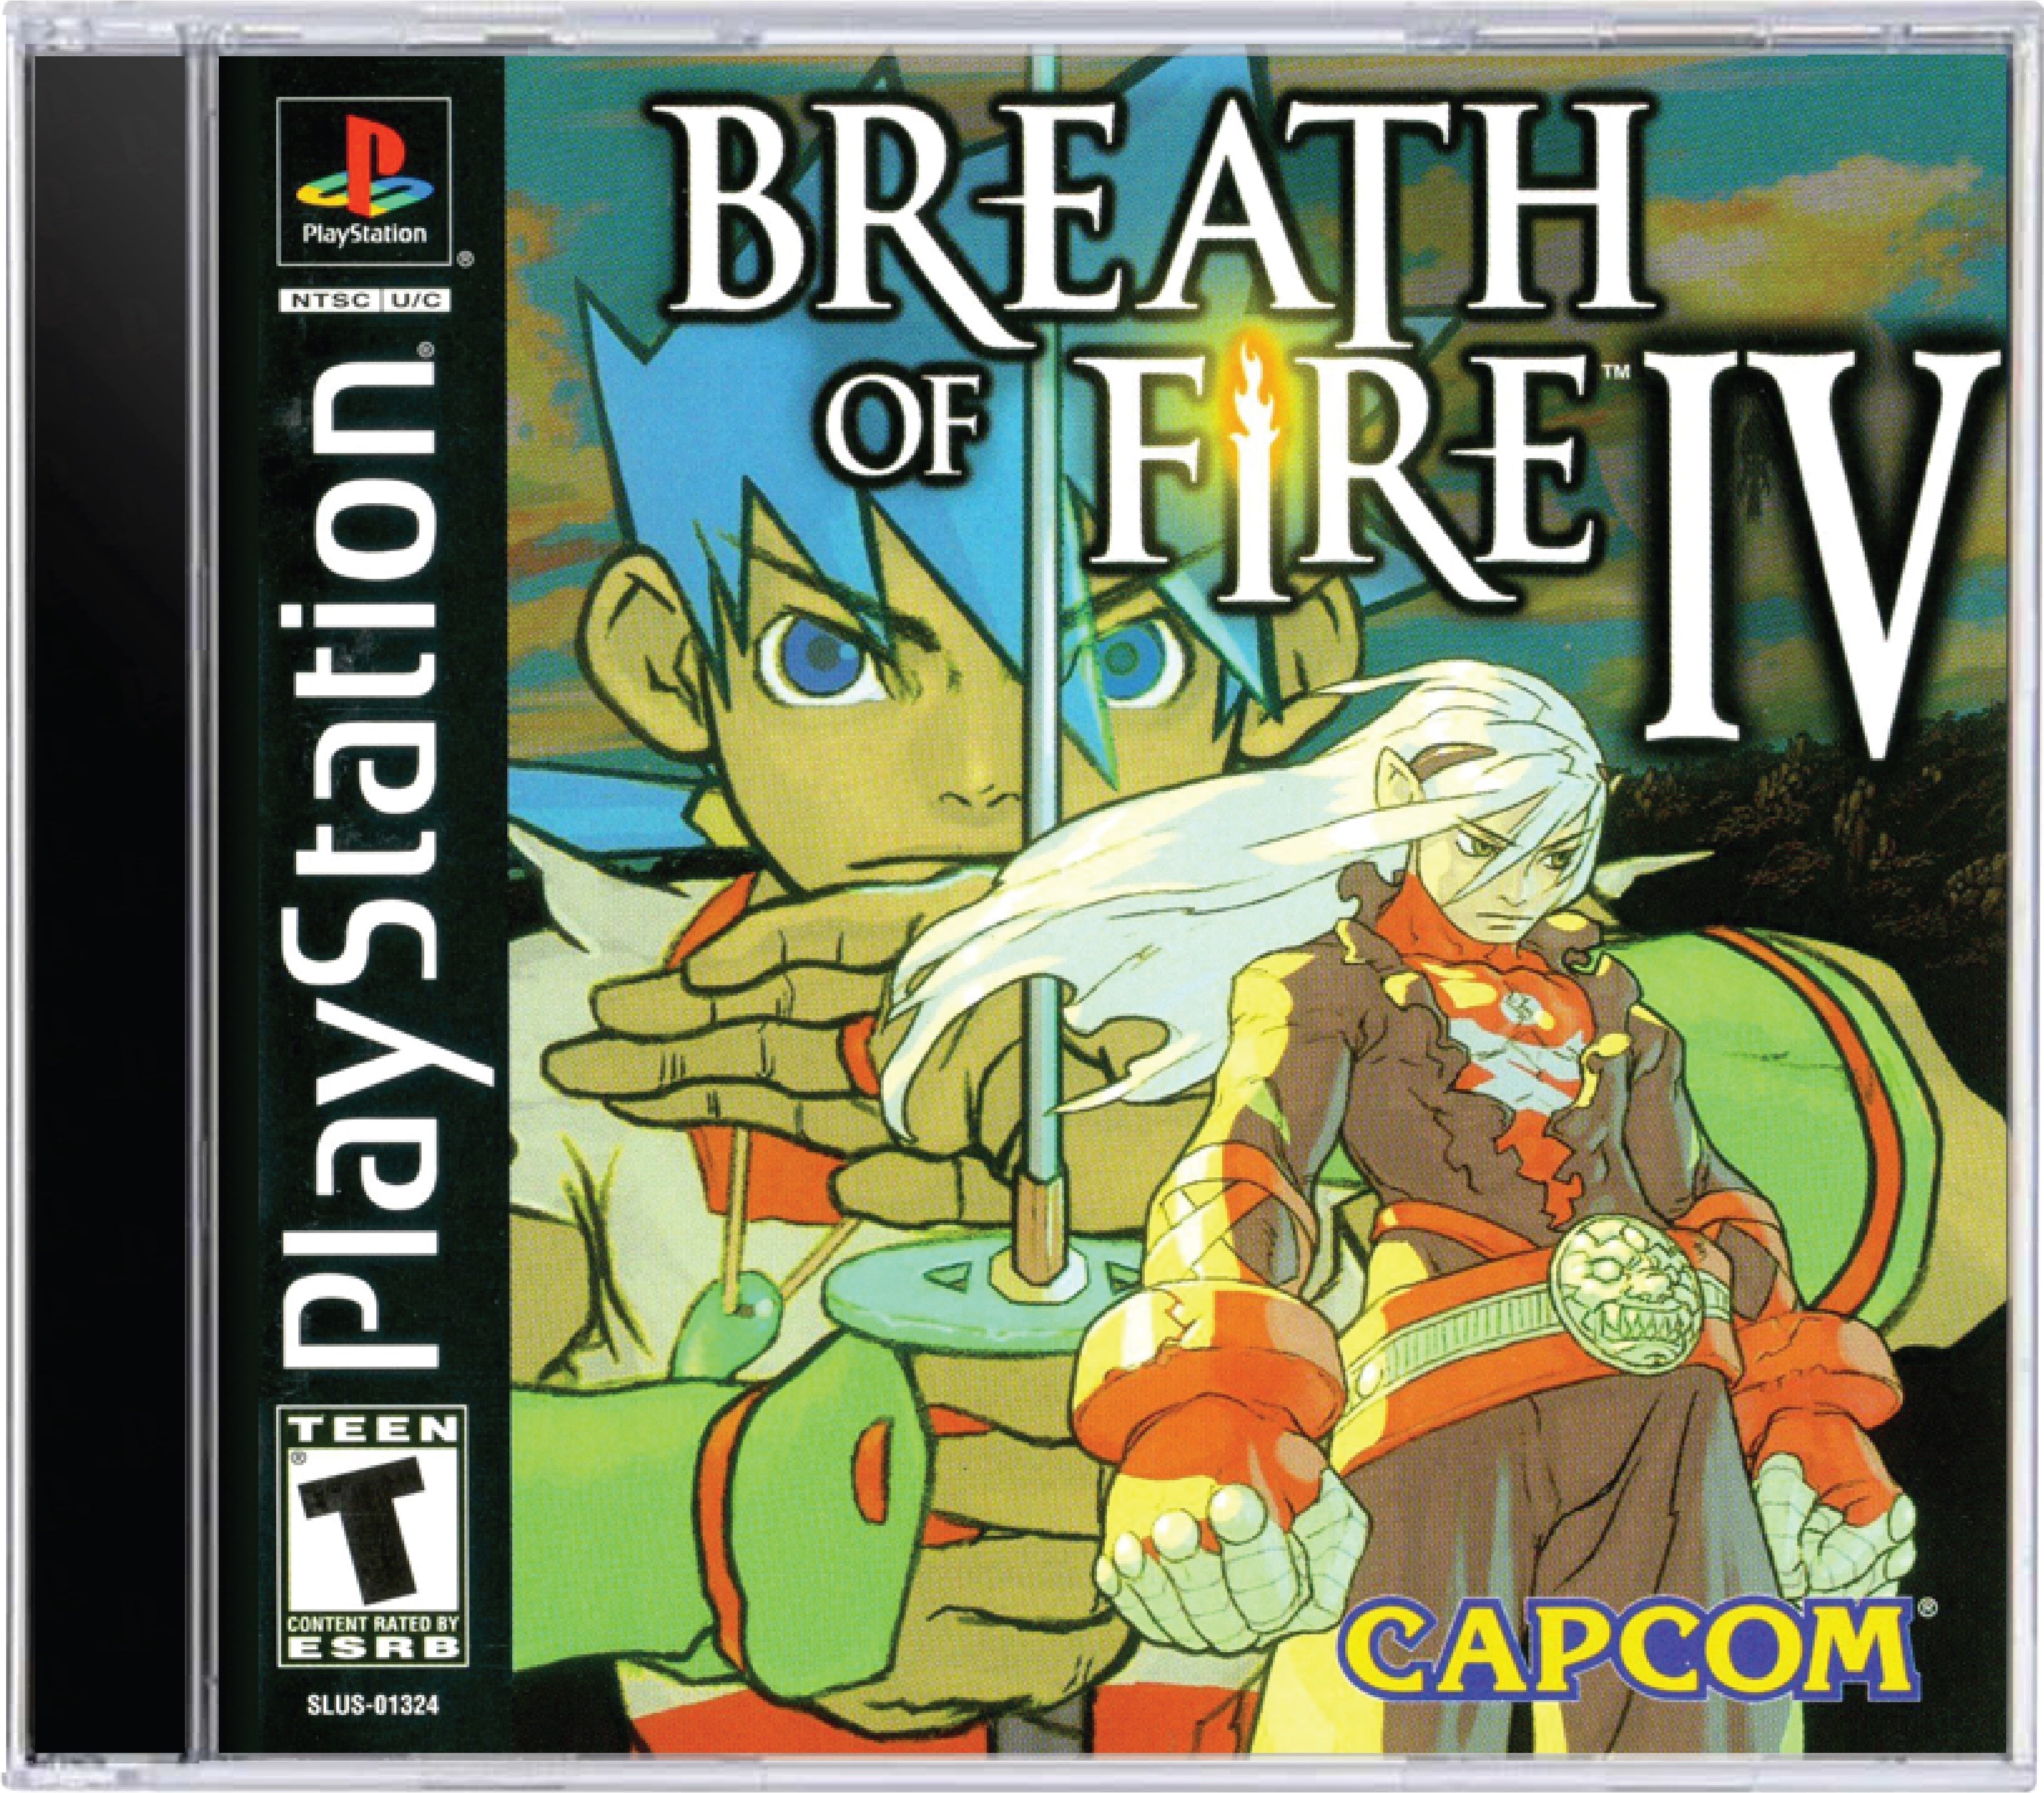 Breath of Fire IV Cover Art and Product Photo